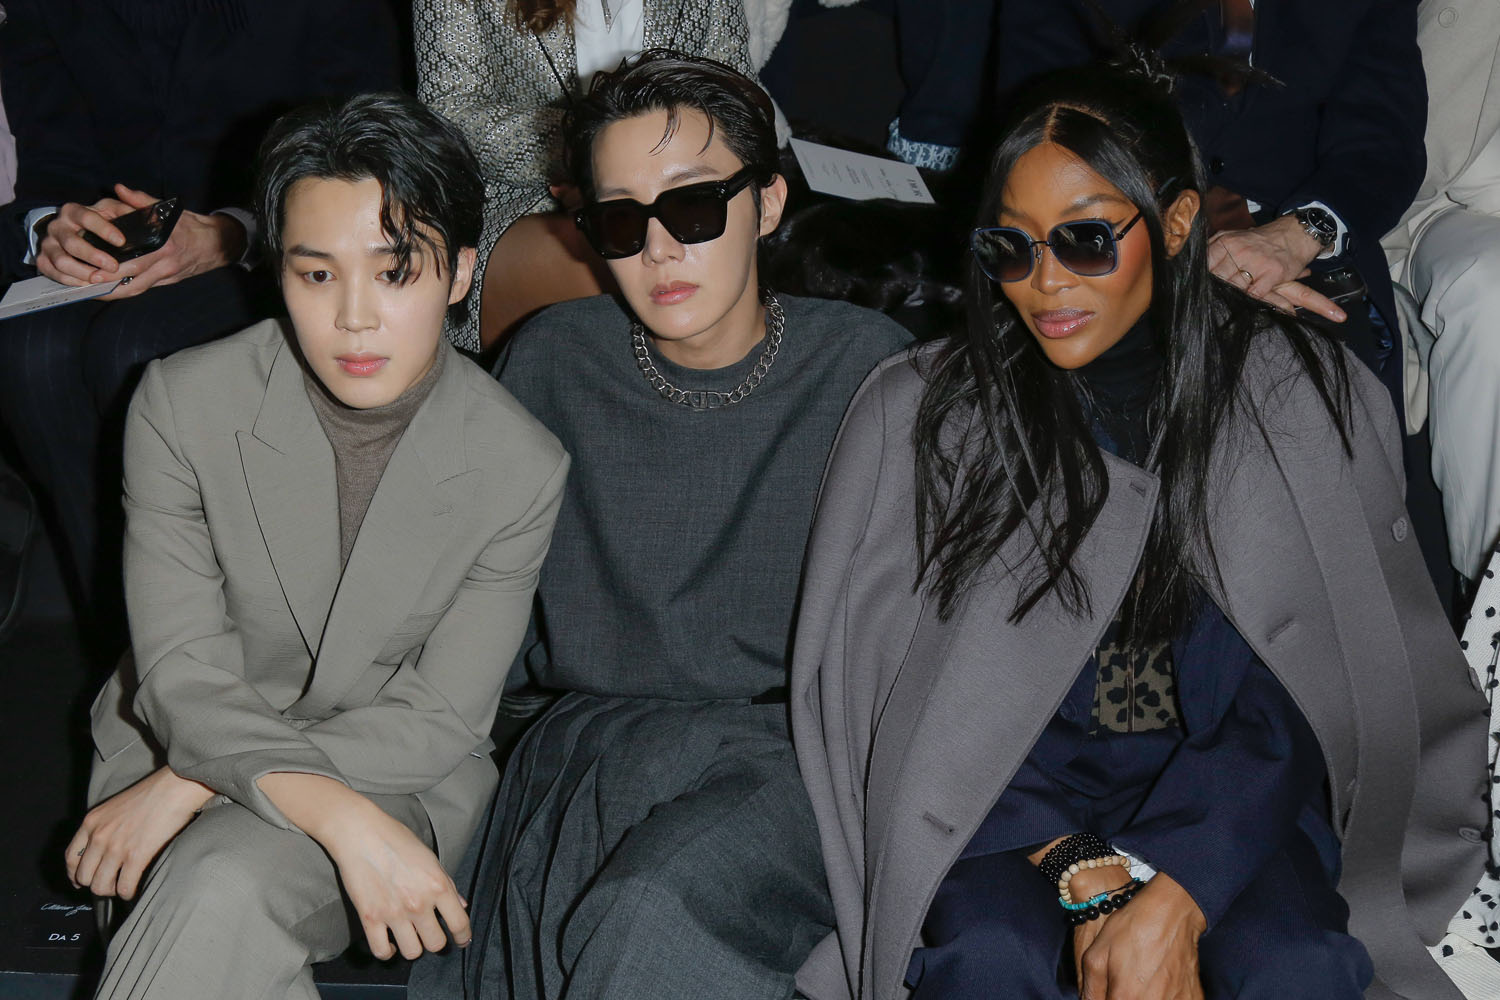 j-hope and Jimin take Paris for Louis Vuitton, Dior, and Hermes